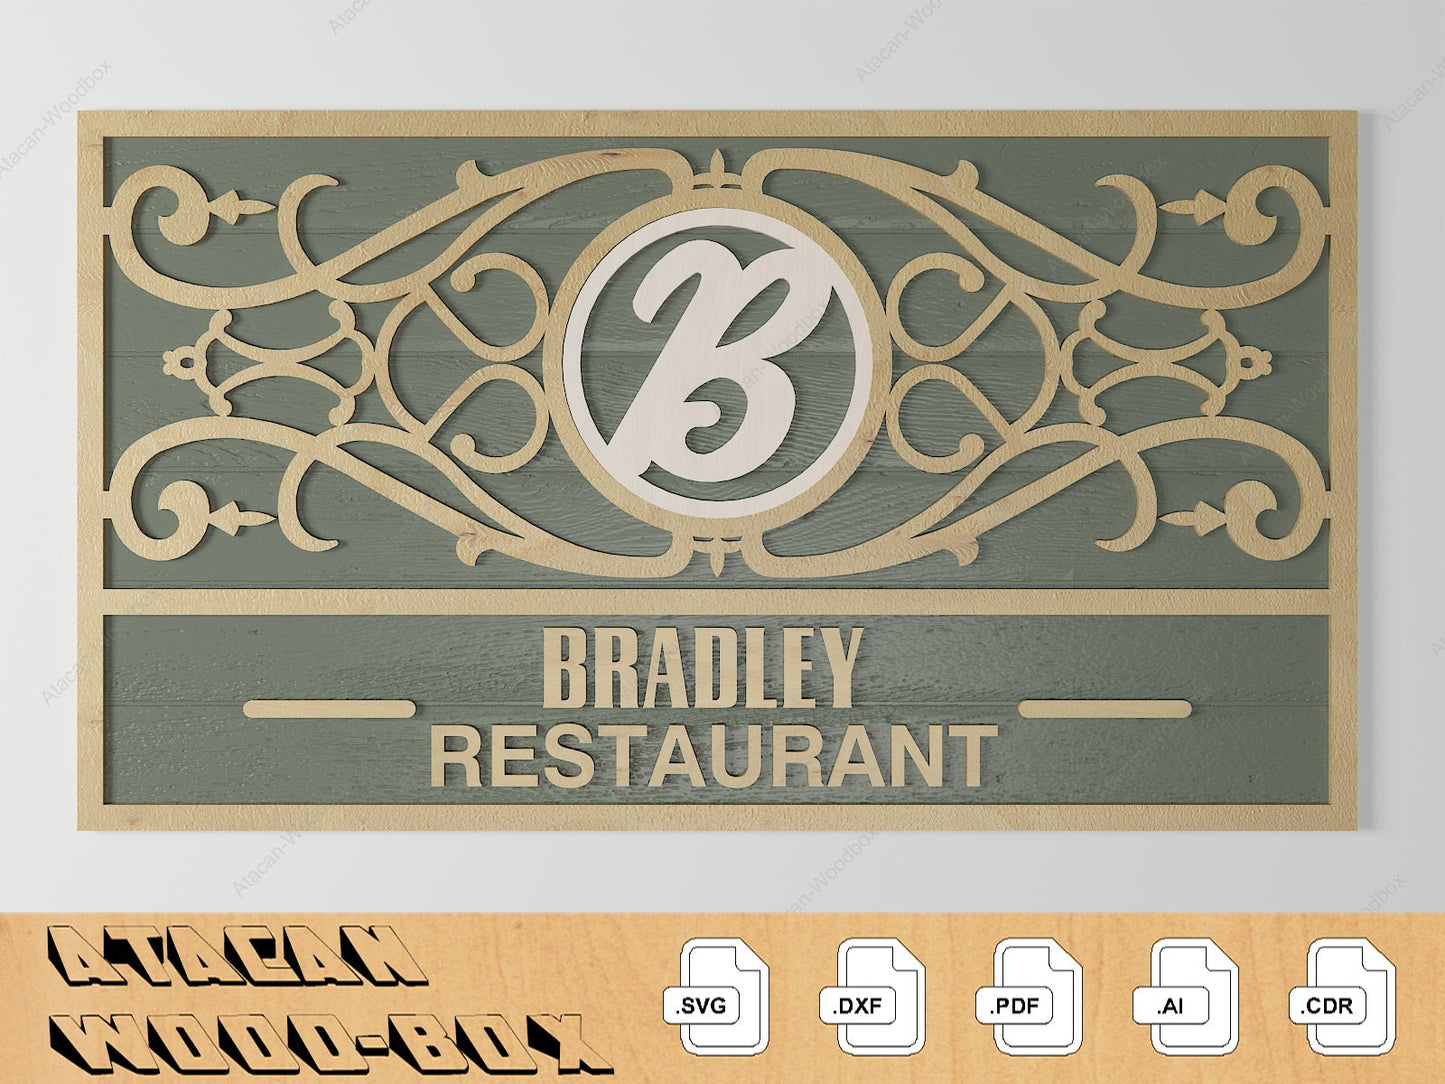 Custom Home Decor Signs / Interchangeable Letter and Icons / Monogram Personalise Laser Cut Files / Glowforge SVG DXF Ai CDR 340